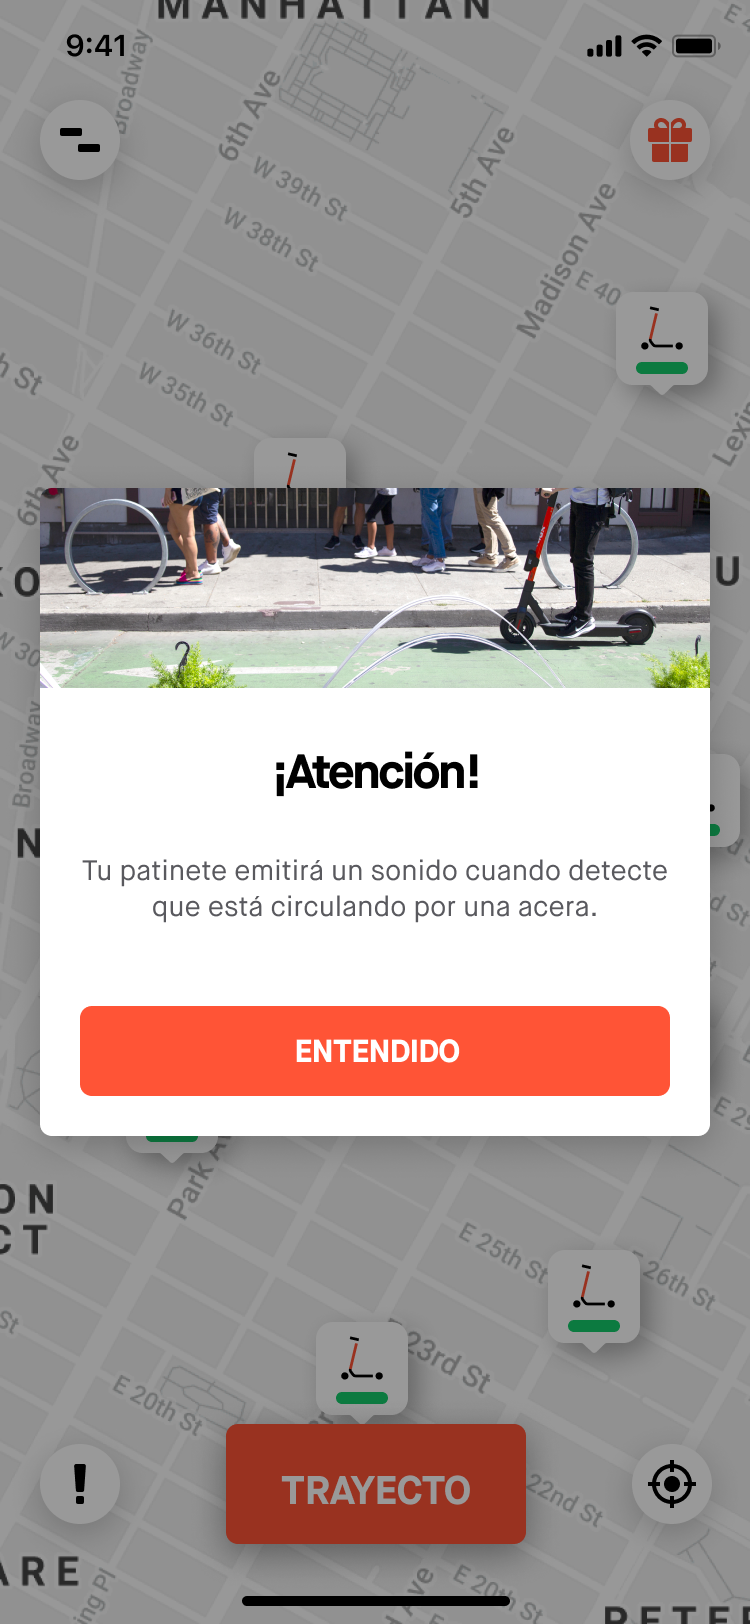 Spin Insight Level 2 - patinete antiaceras - inteligencia artificial - machine learning - alerta